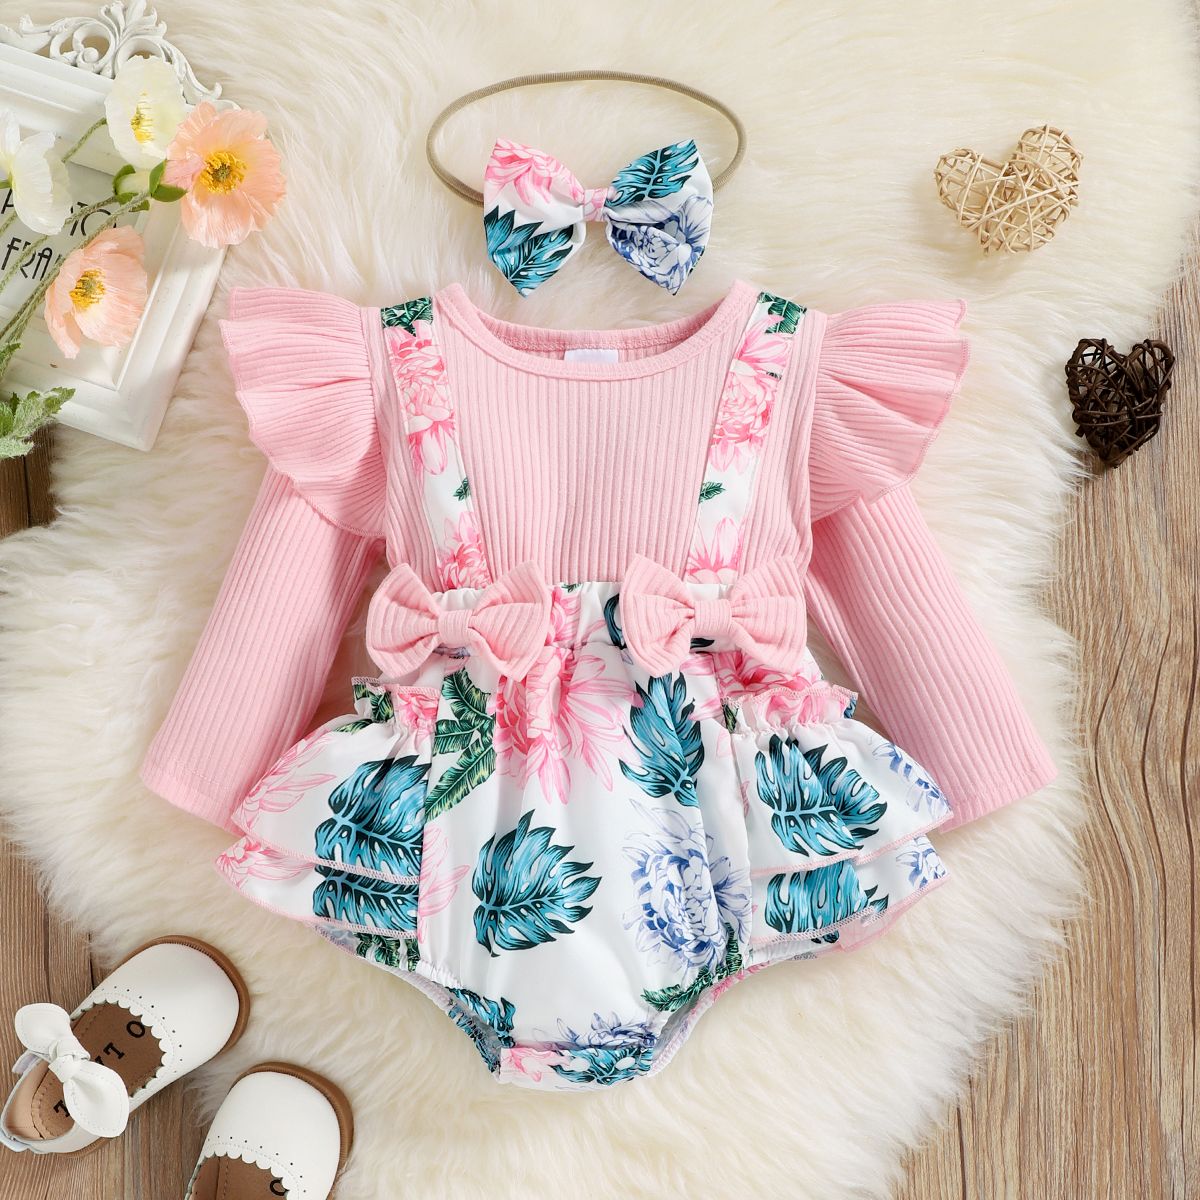 

2pcs Baby Girl 95% Cotton Long-sleeve Rib Knit Bow Front Spliced Palm Leaf Print Layered Ruffle Romper with Headband Set